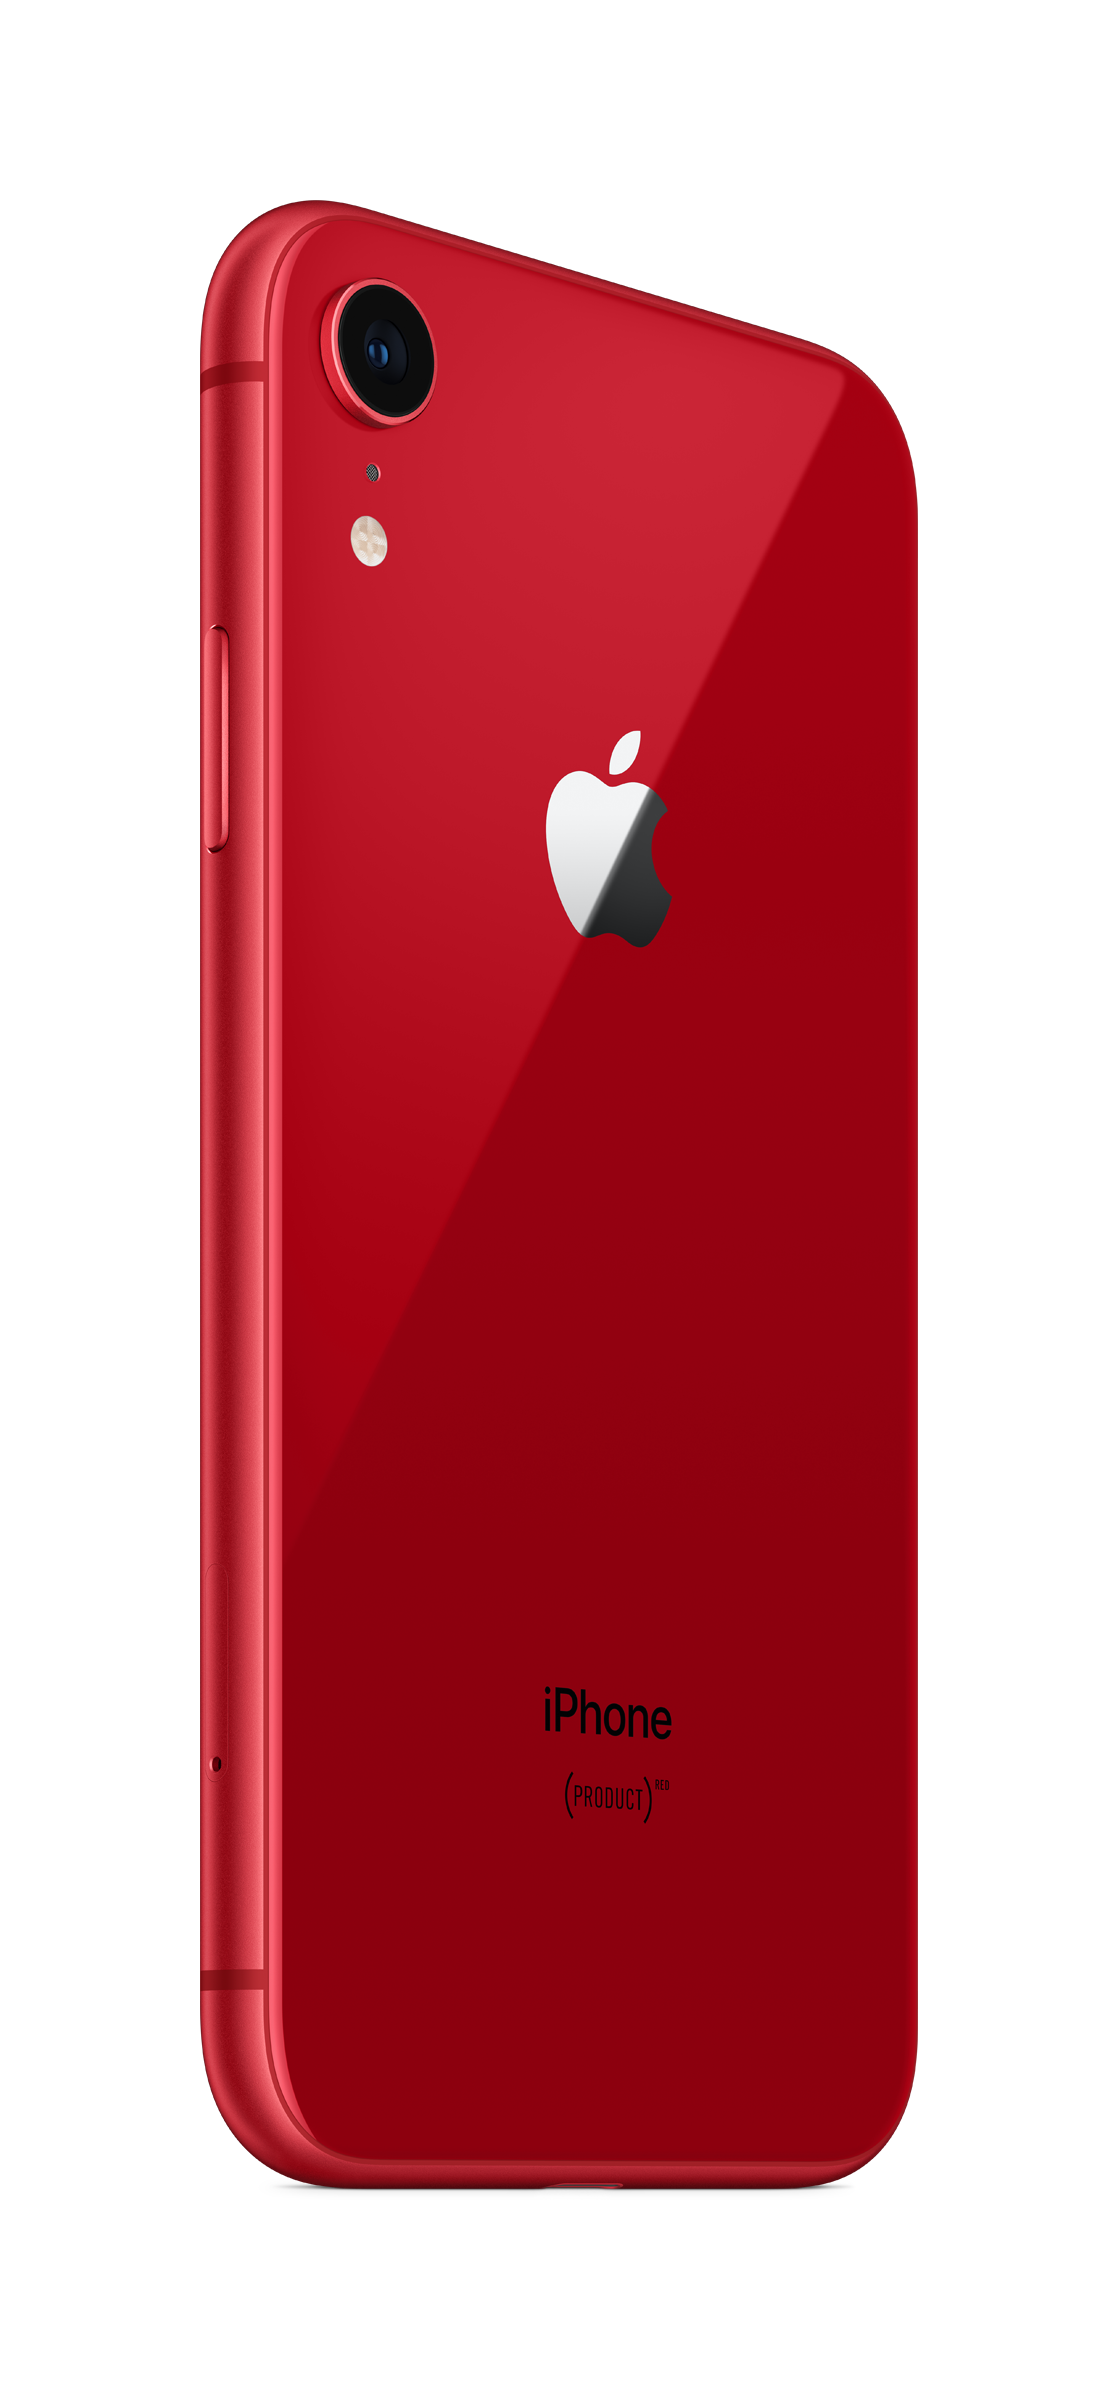 opladning købe Machu Picchu Iphone XR product Red | tspea.org